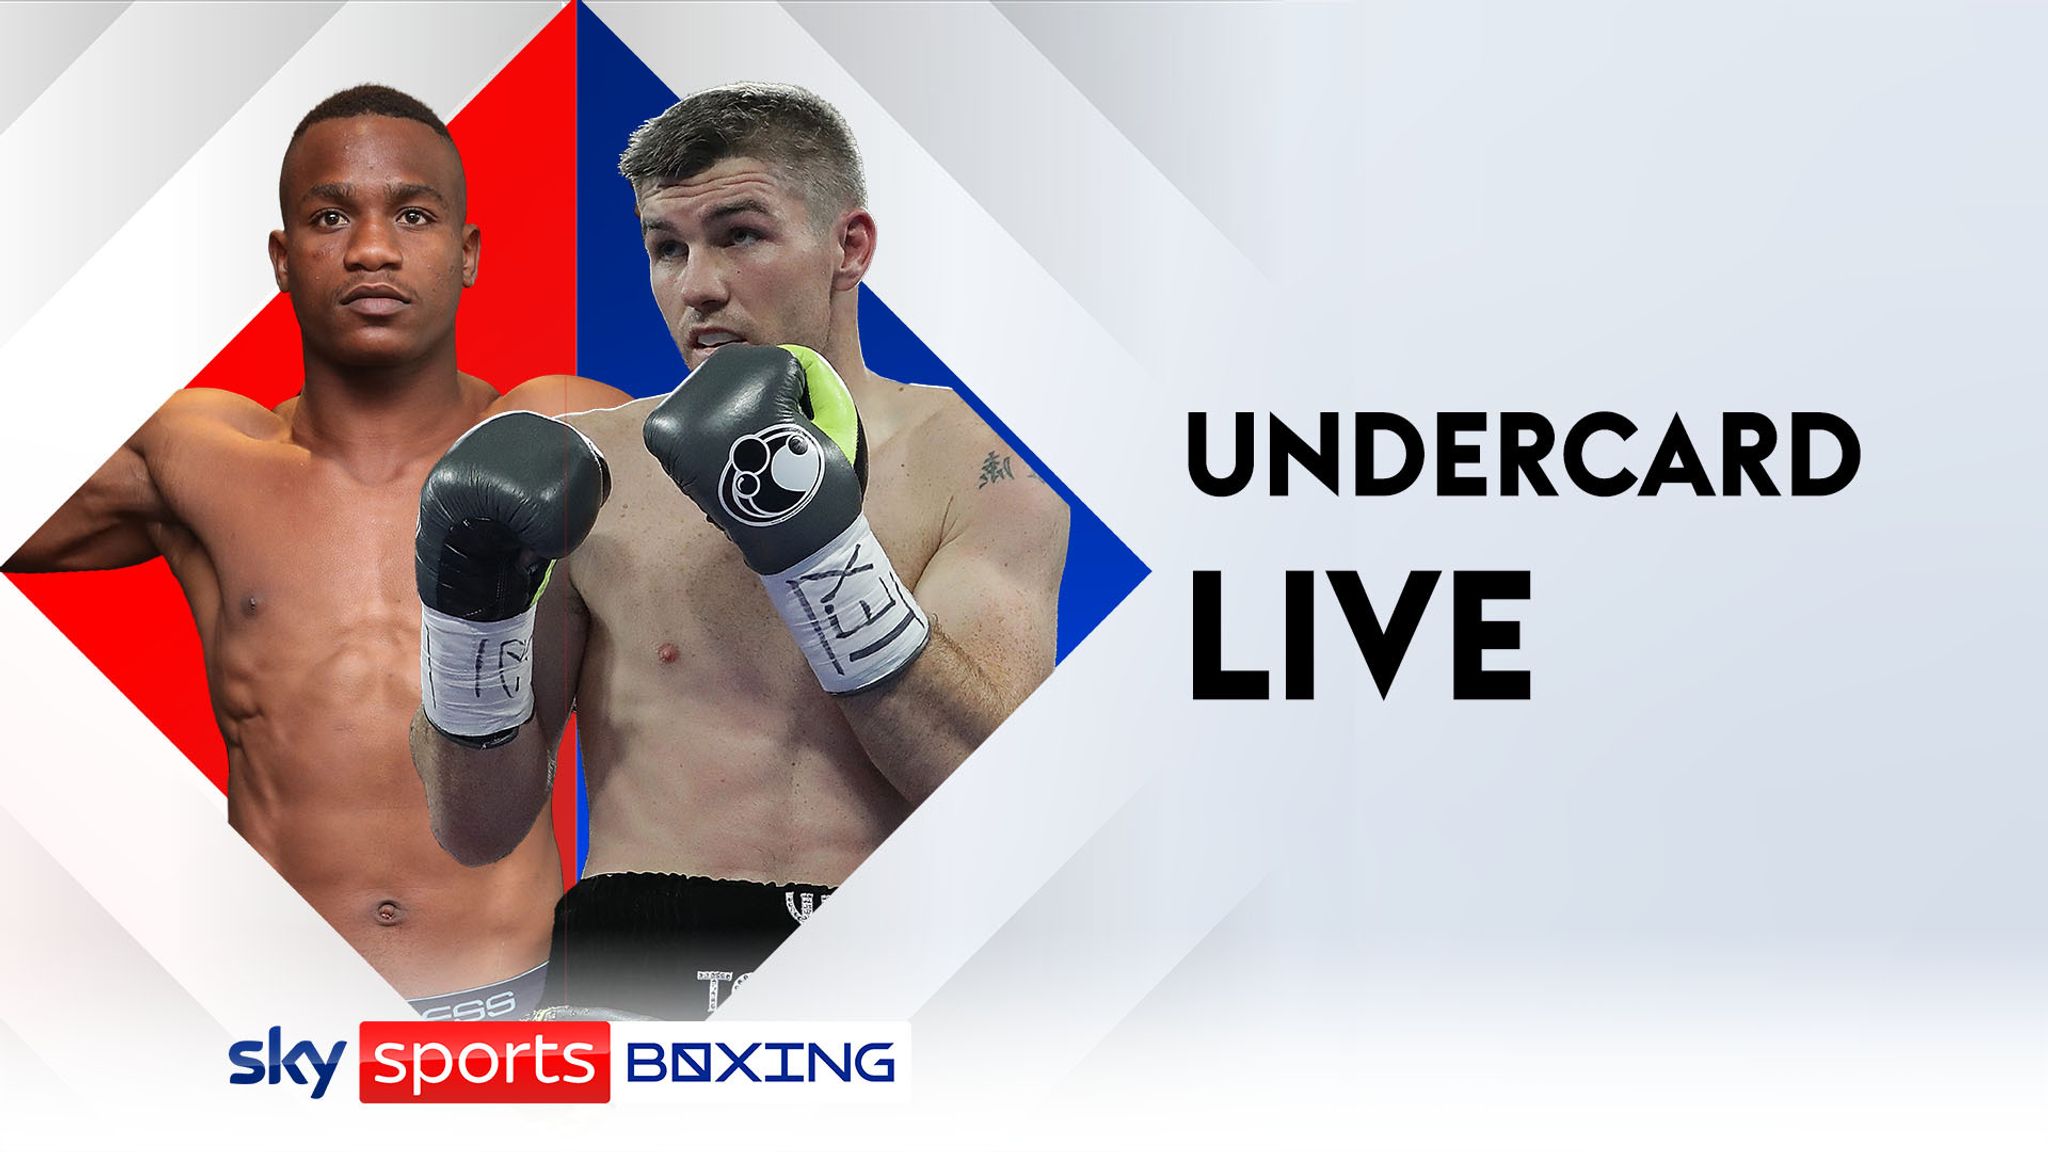 Liam Smith vs Hassan Mwakinyo undercard LIVE! Watch British champ Dan Azeez vs Shakan Pitters and a host of top prospects Boxing News Sky Sports